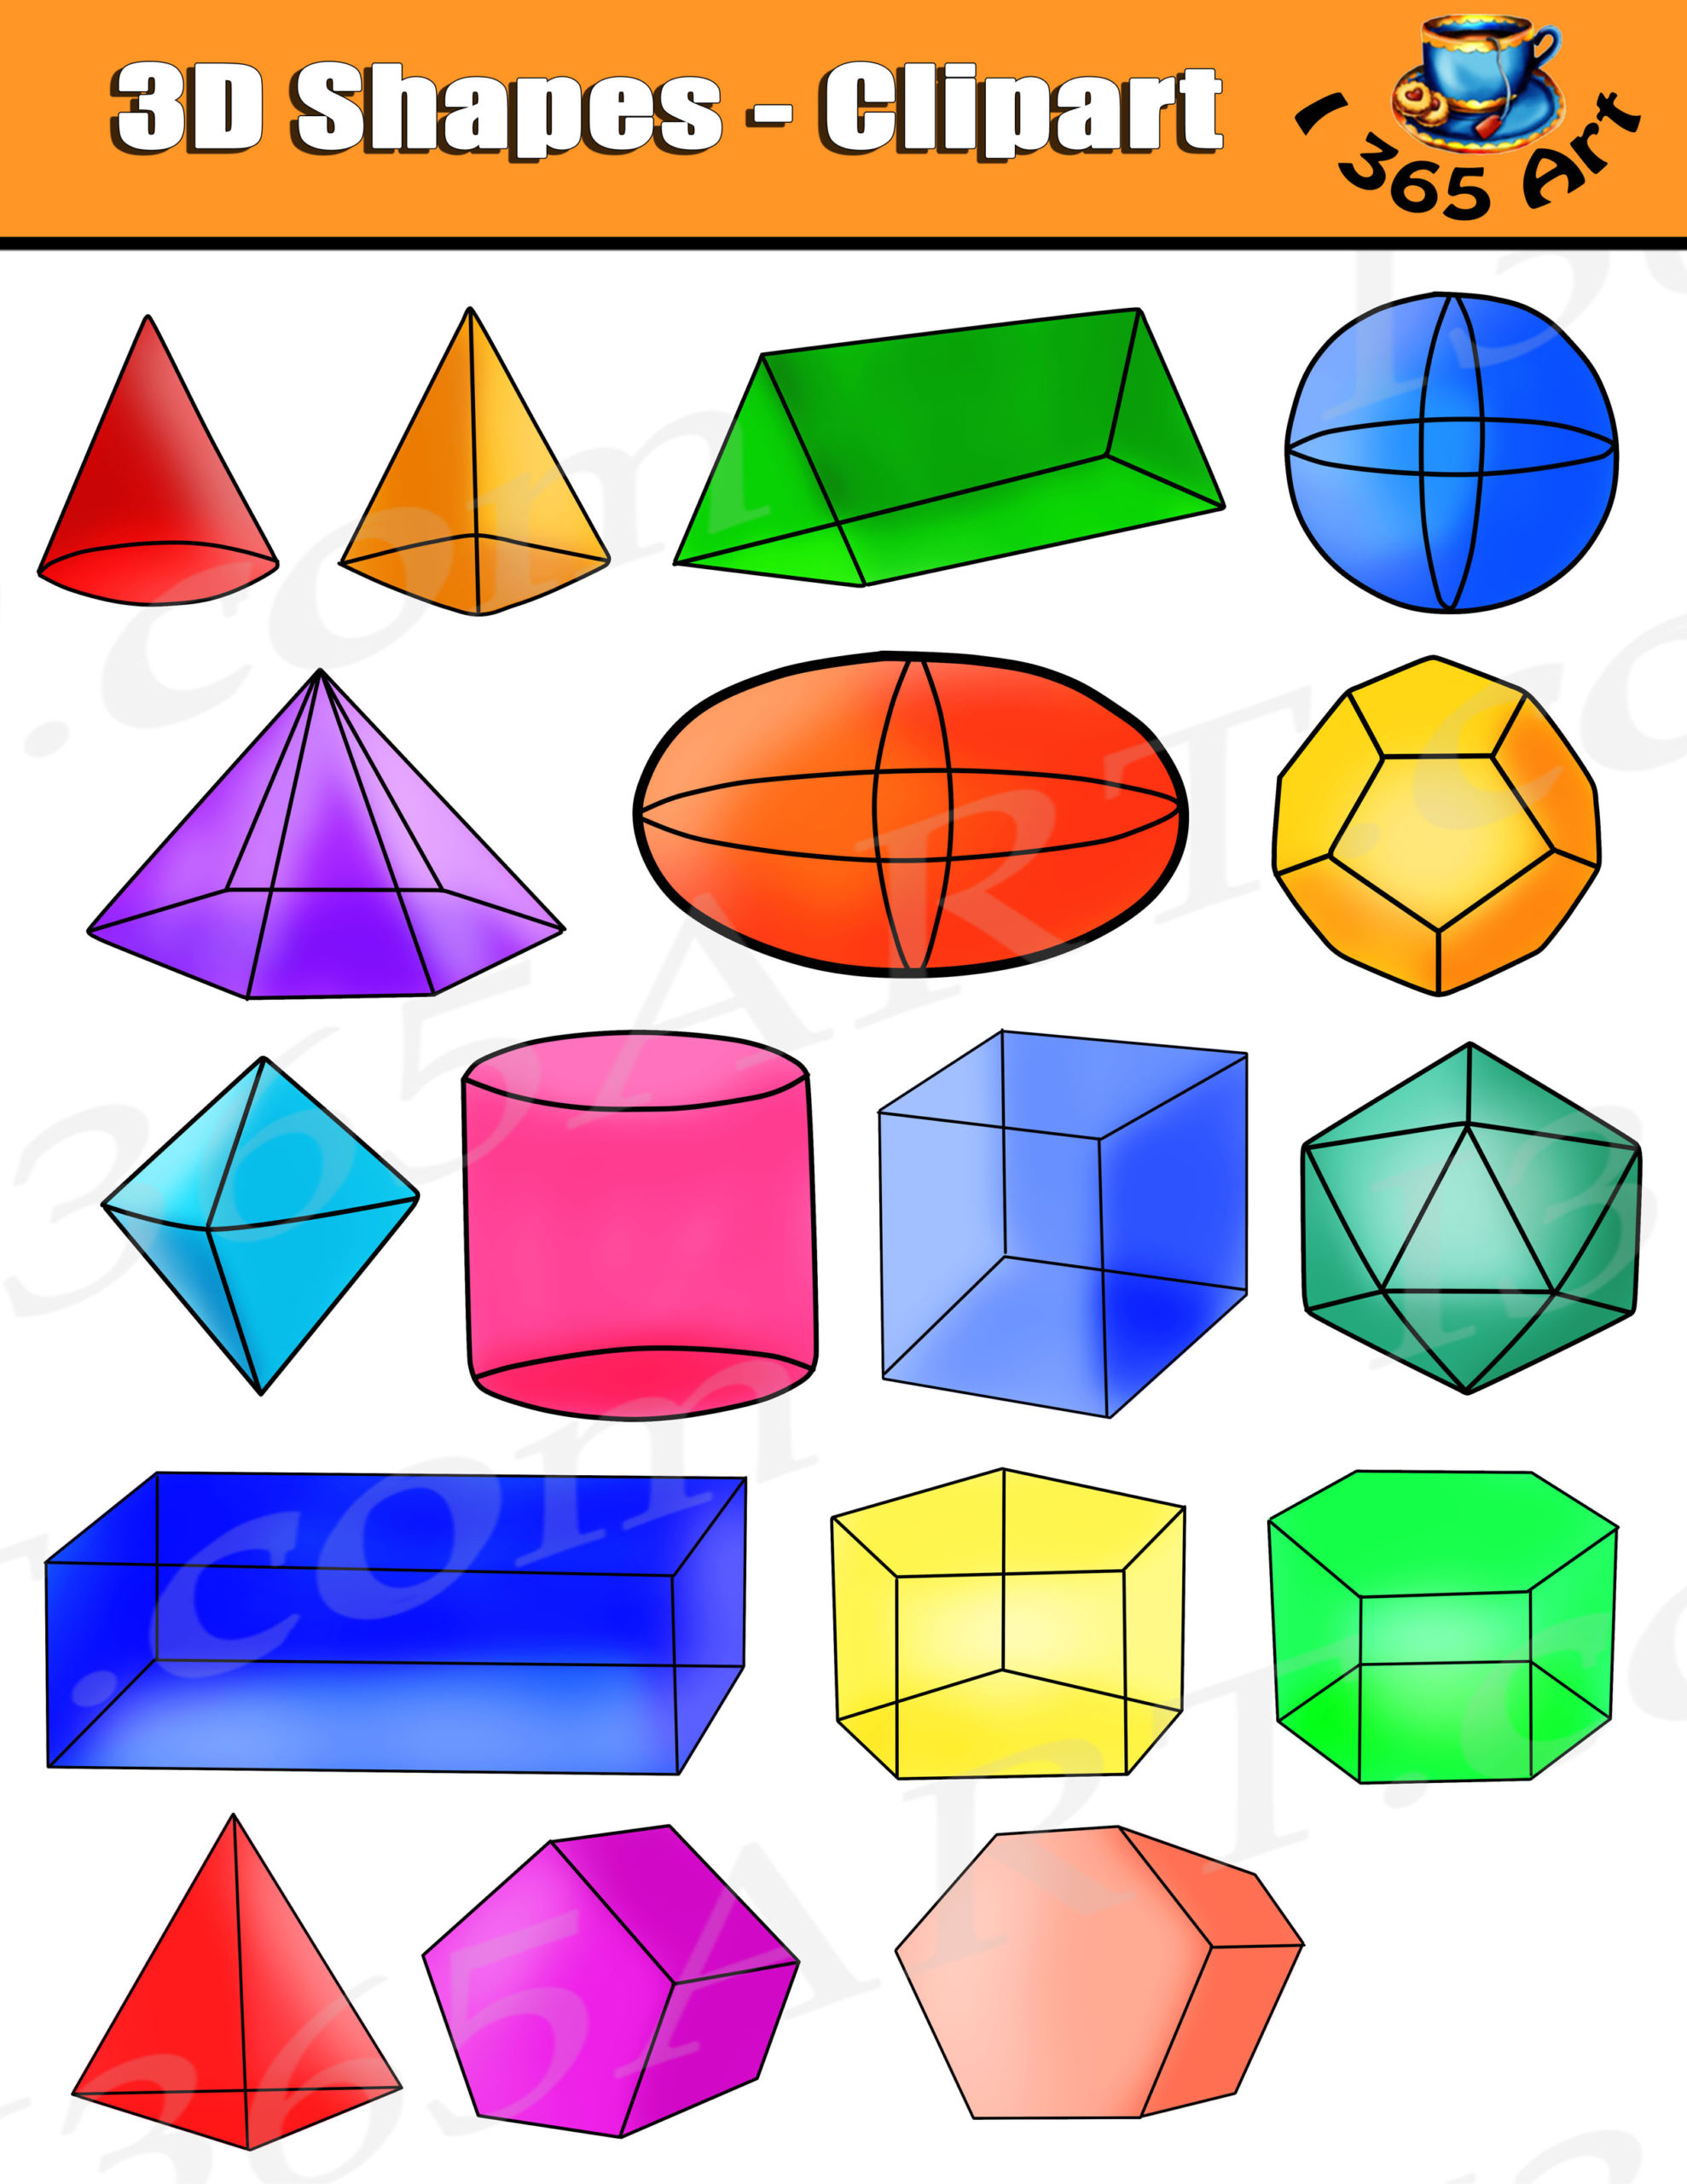 geometrical shapes in 3d